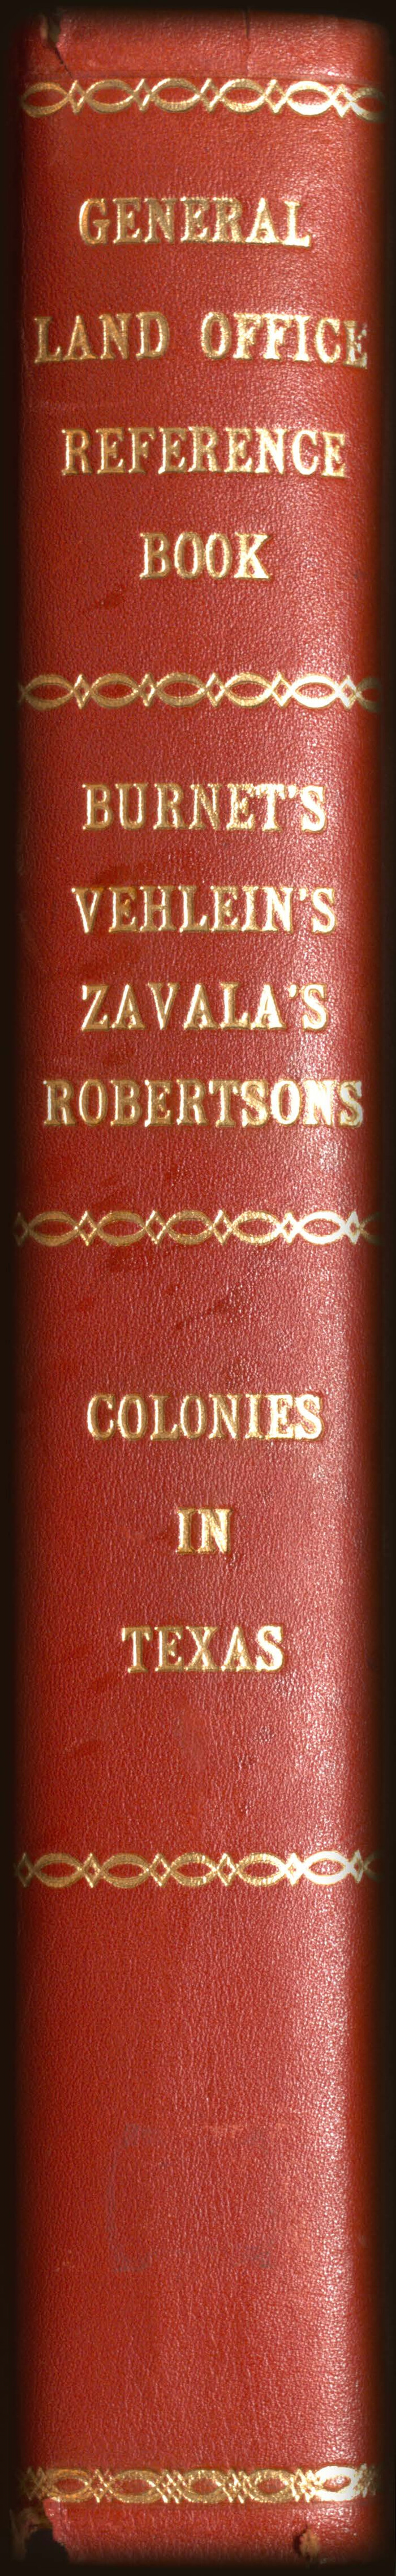 94555, General Land Office Reference Book: Burnet's, Vehlein's, Zavala's, Robertson's Colonies in Texas, Historical Volumes